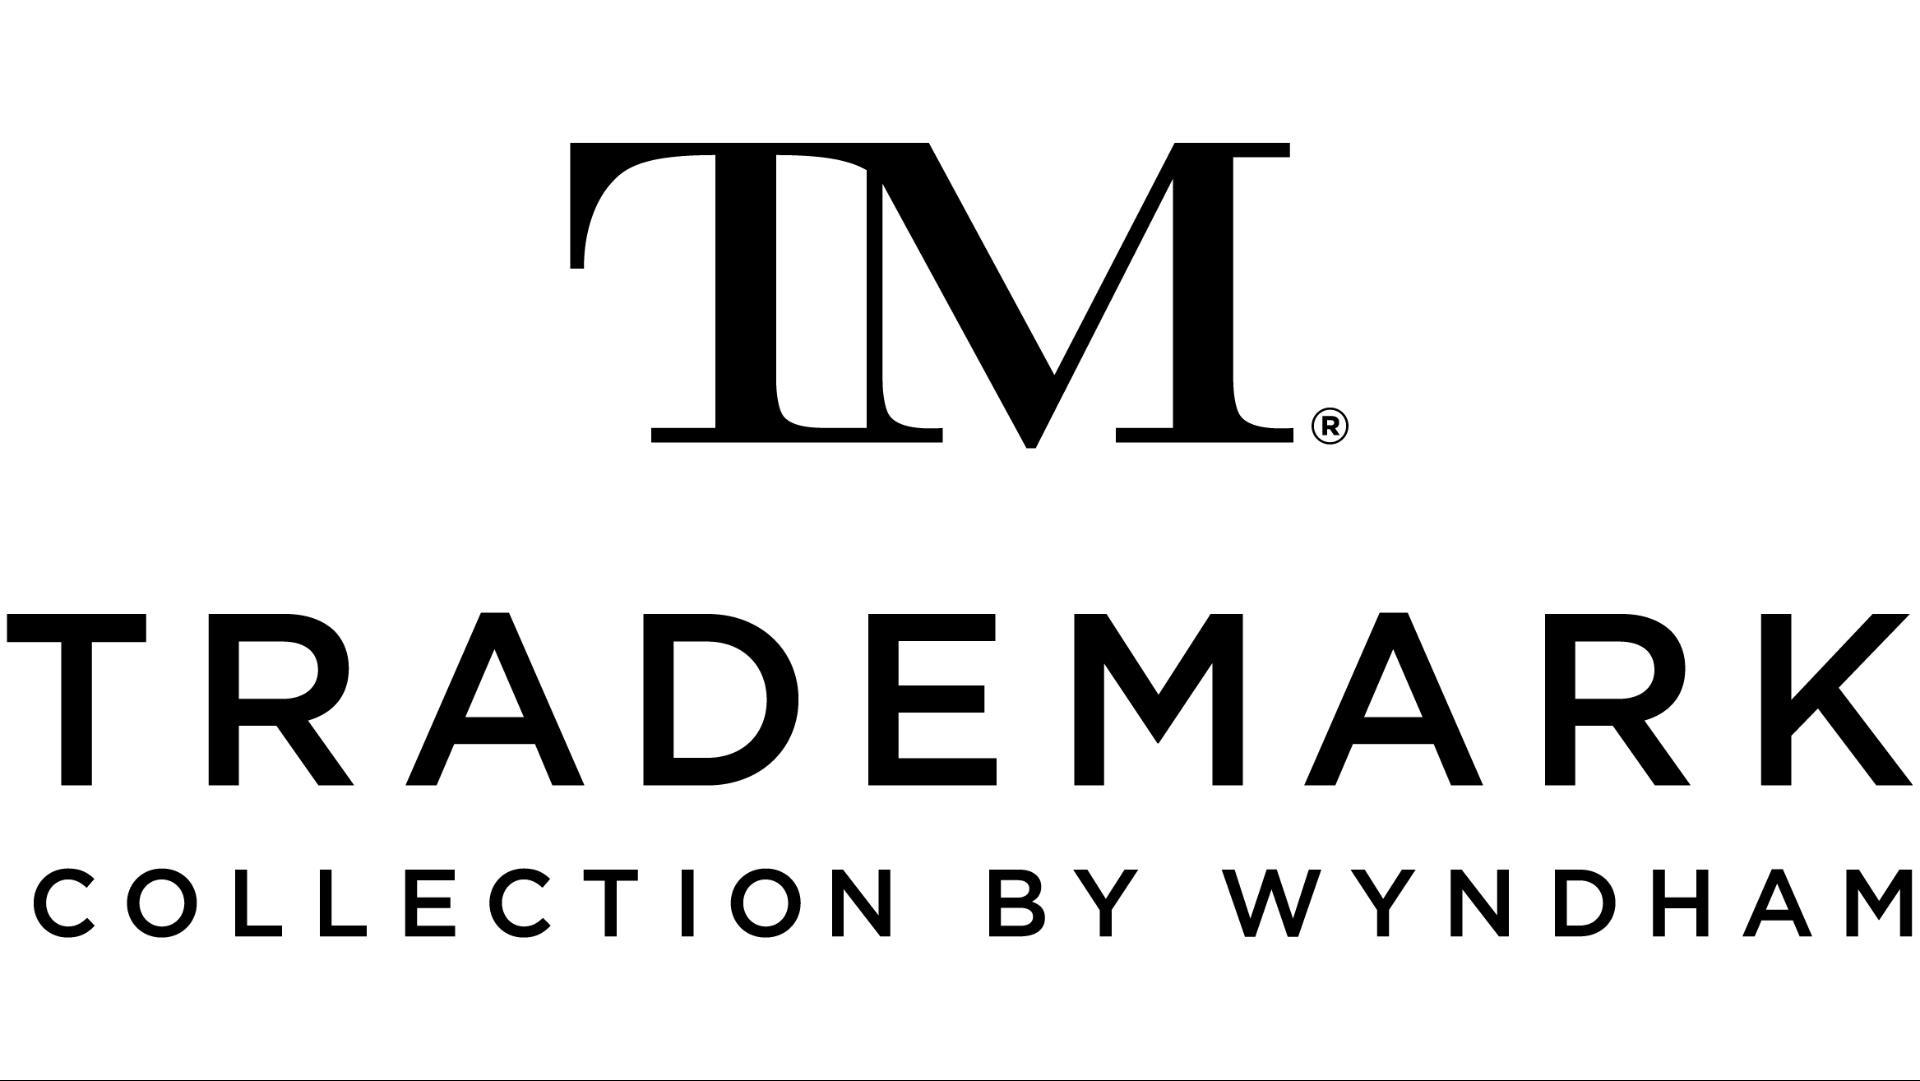 Painter's Lodge, Trademark Collection by Wyndham in Campbell River, BC